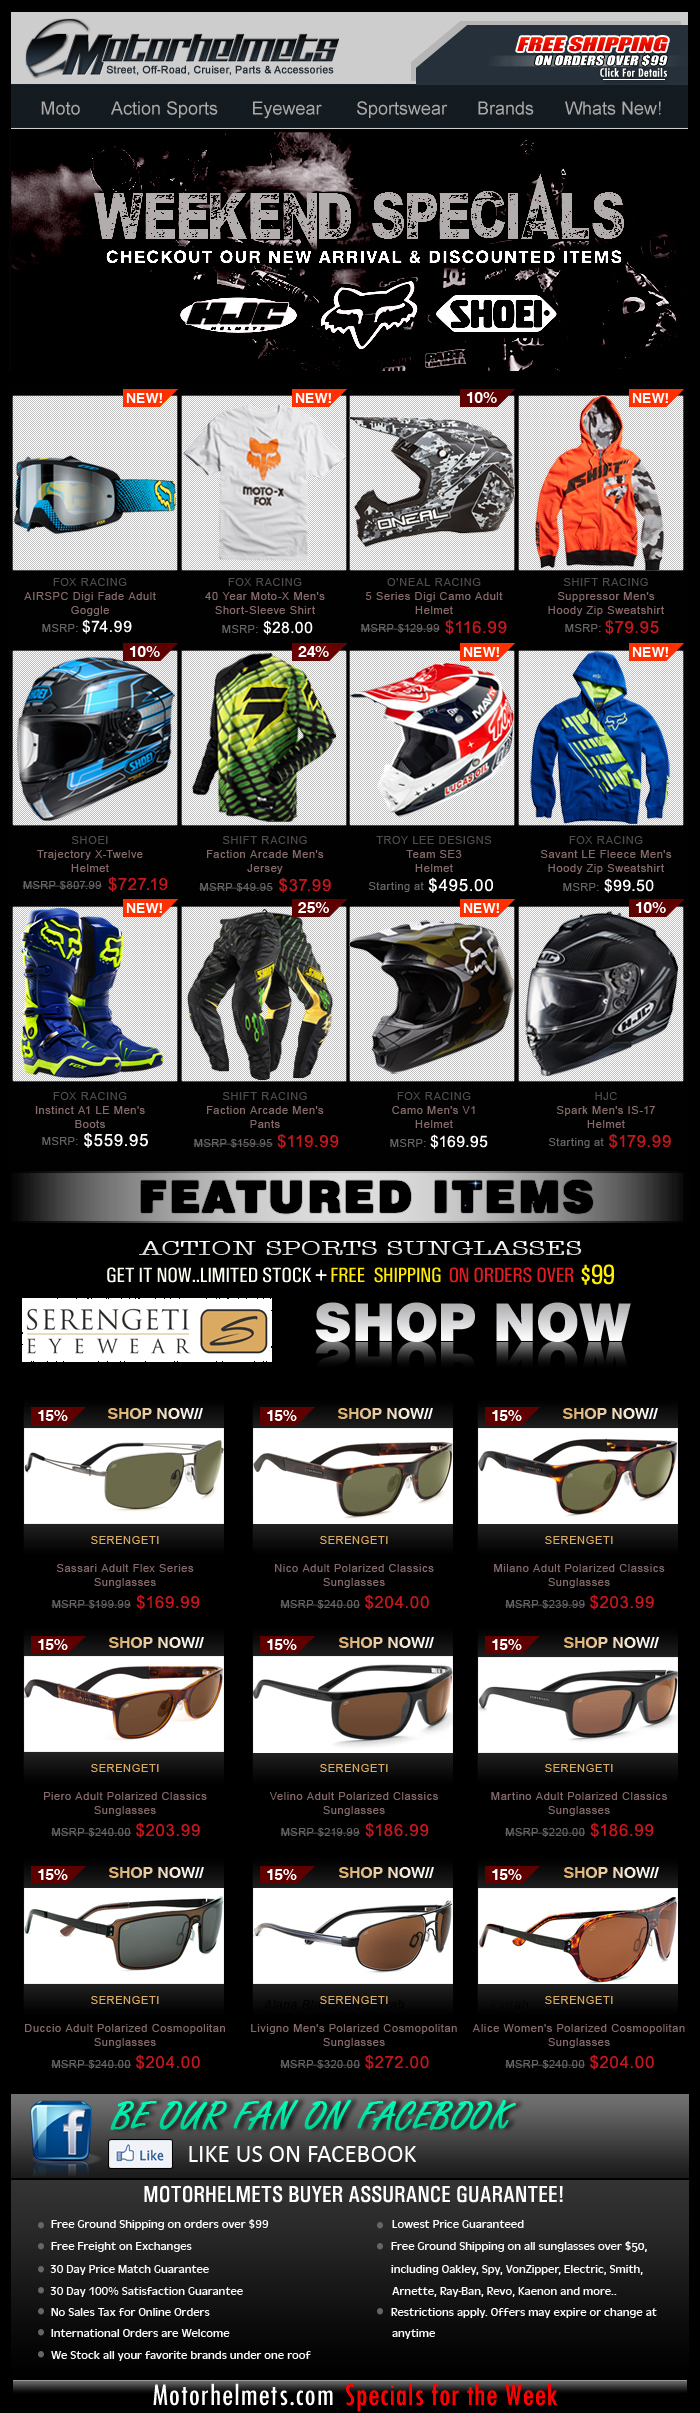 Weekend Specials, Featuring New and Discounted FOX, Shift and More Premium Items!